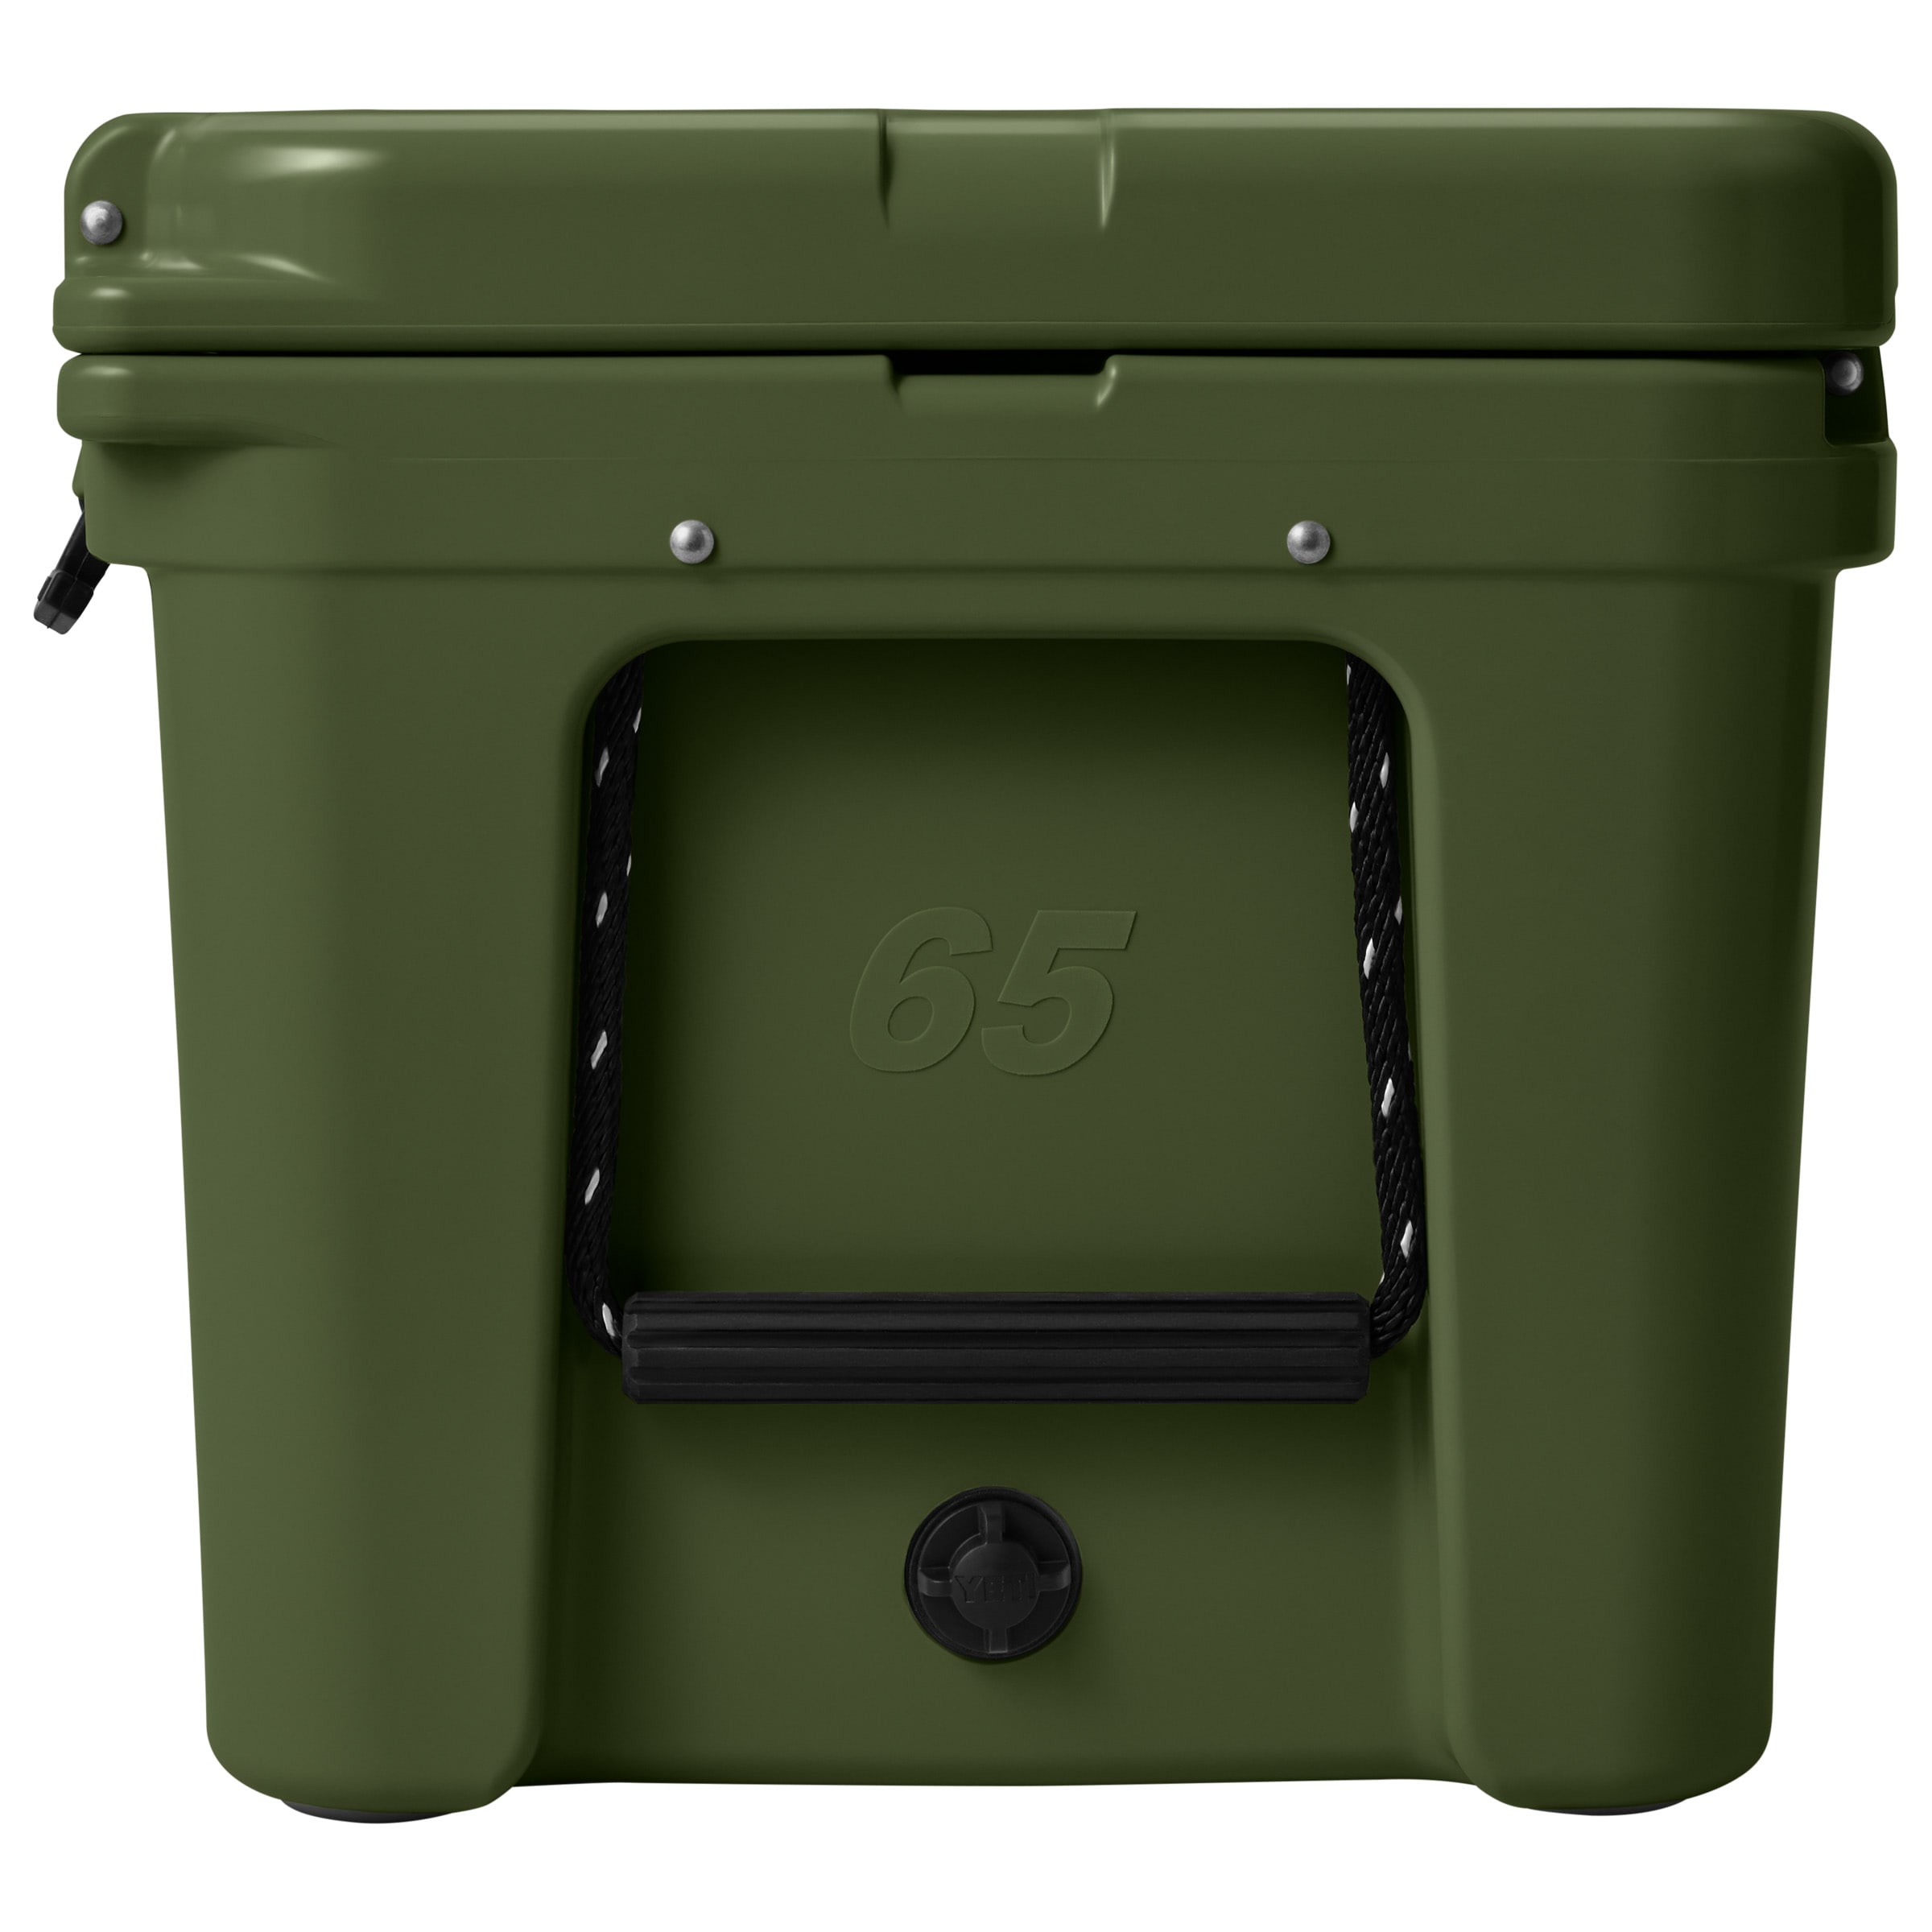 Solid Teal Skin For Yeti 75 qt Cooler — MightySkins